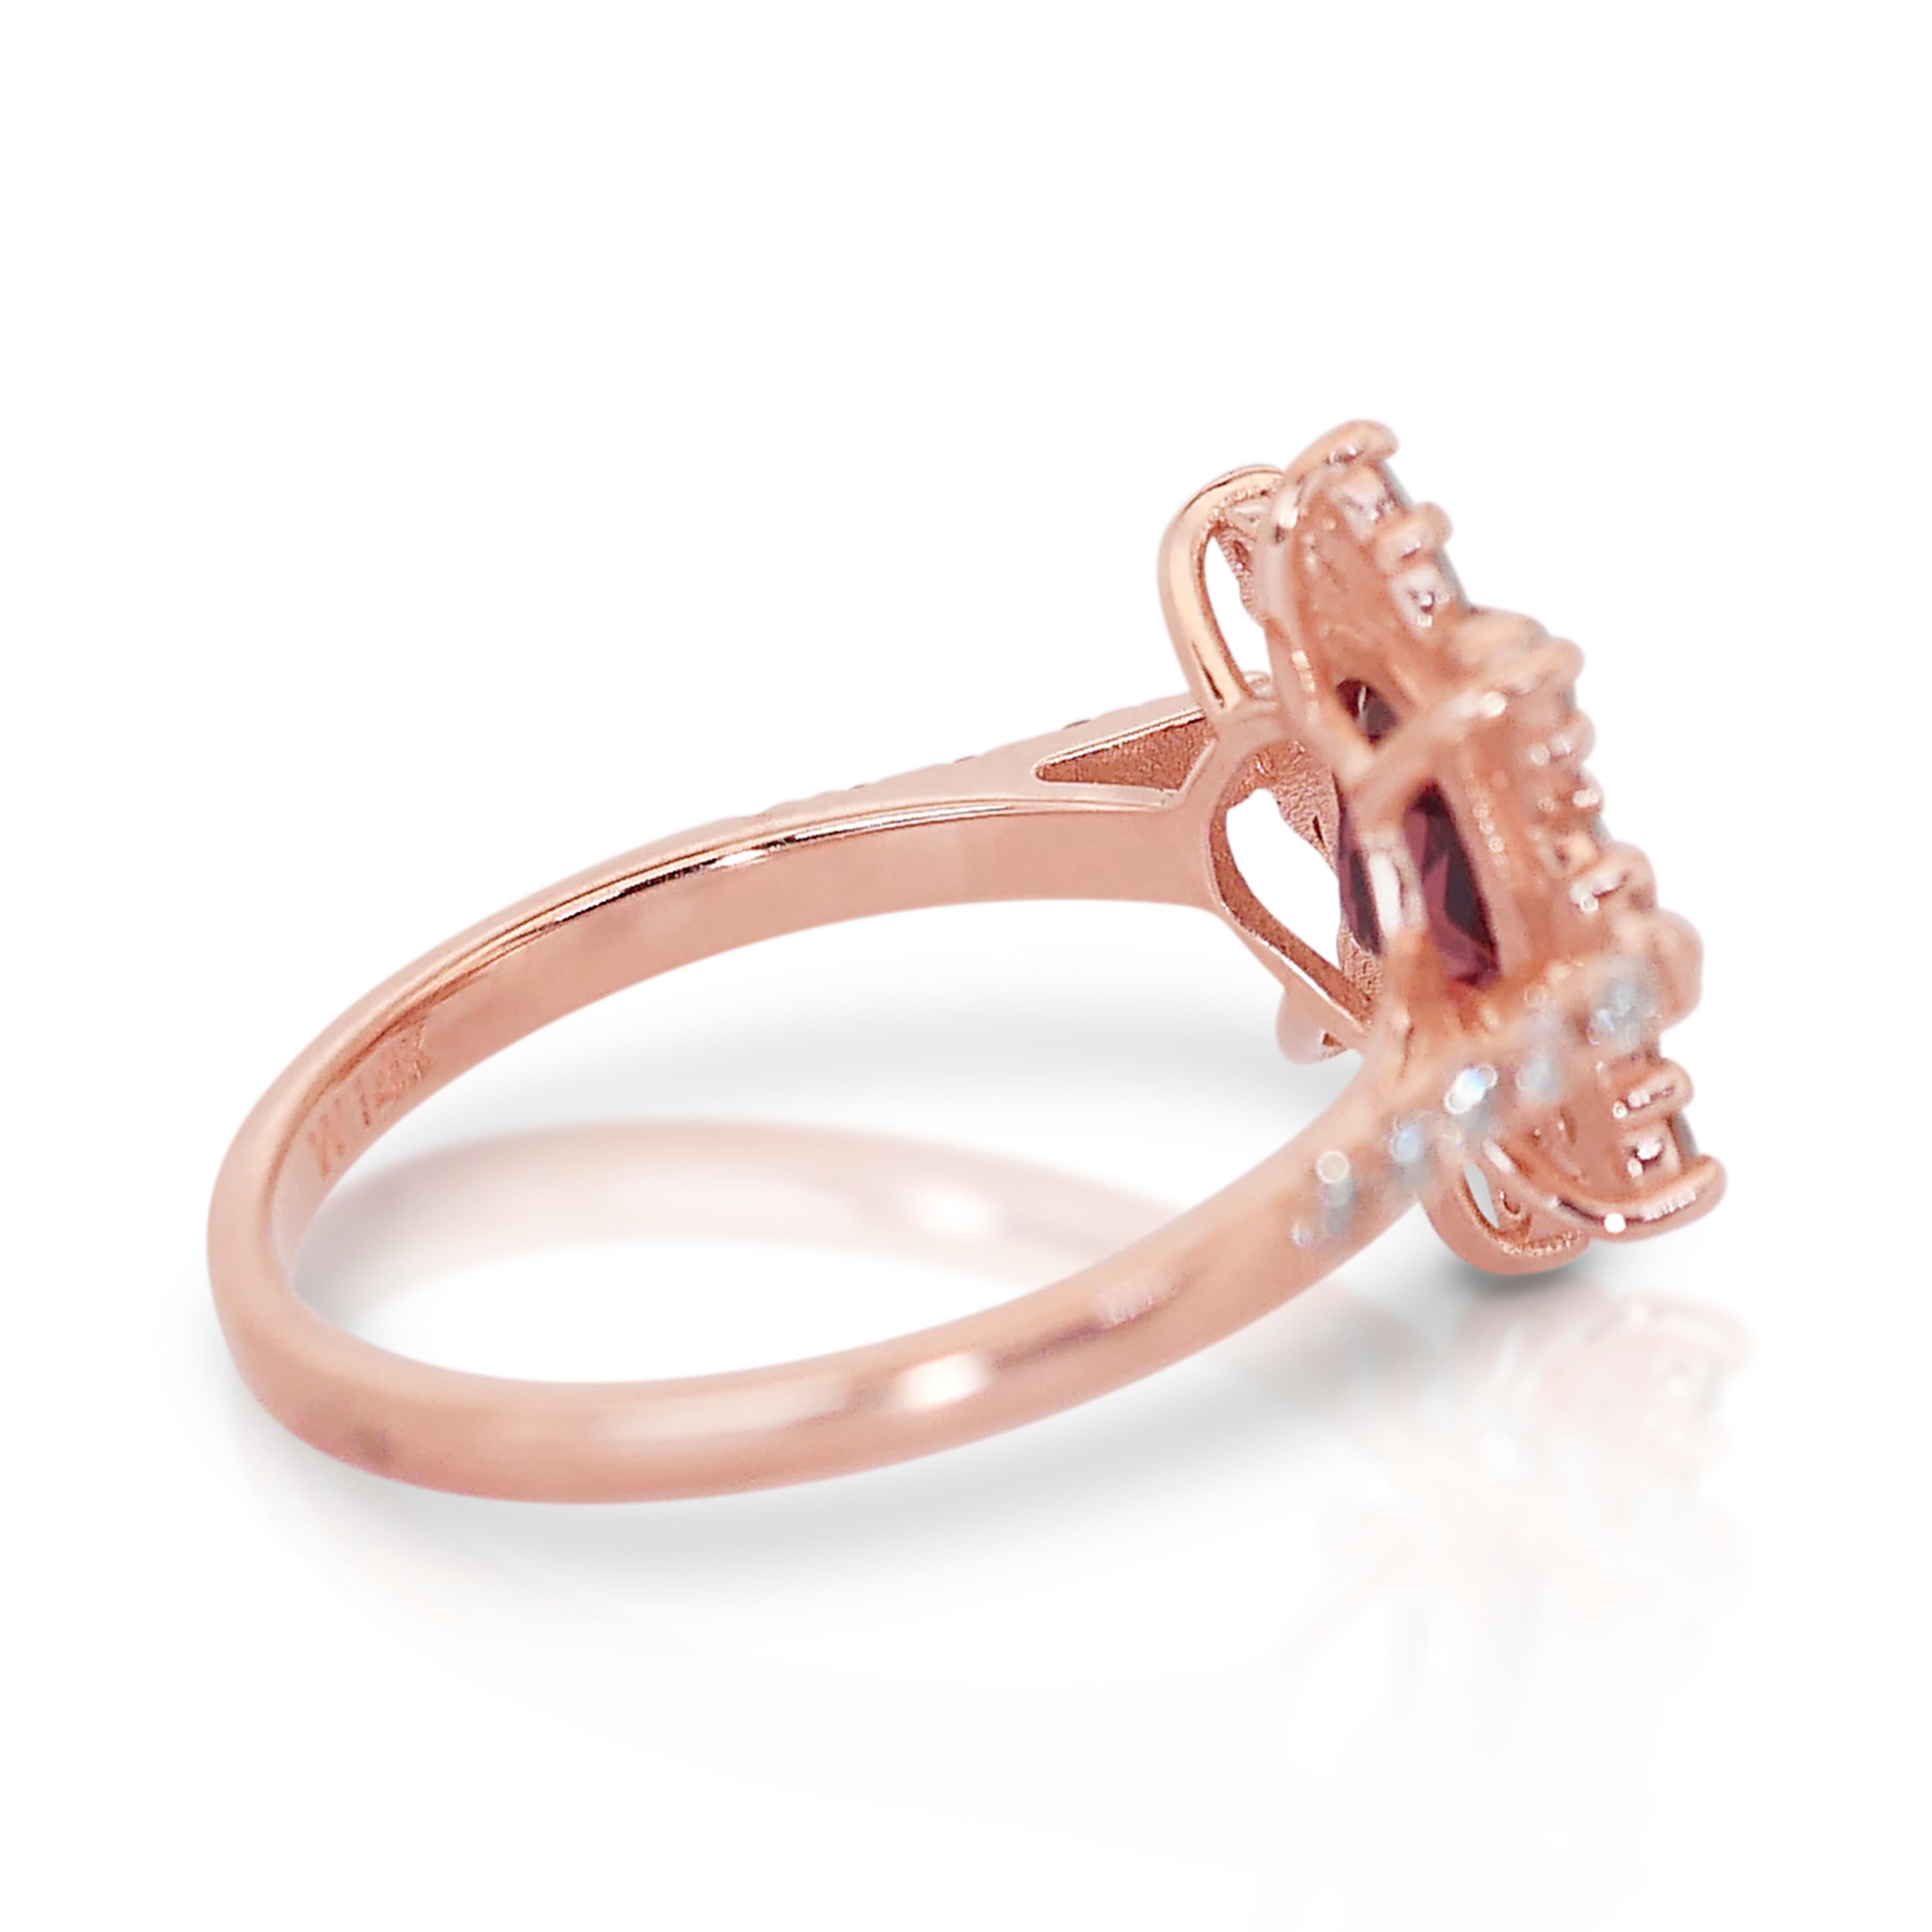 Captivating 14k Rose Gold Garnet and Diamond Halo Ring w/1.87 ct - IGI Certified In New Condition For Sale In רמת גן, IL